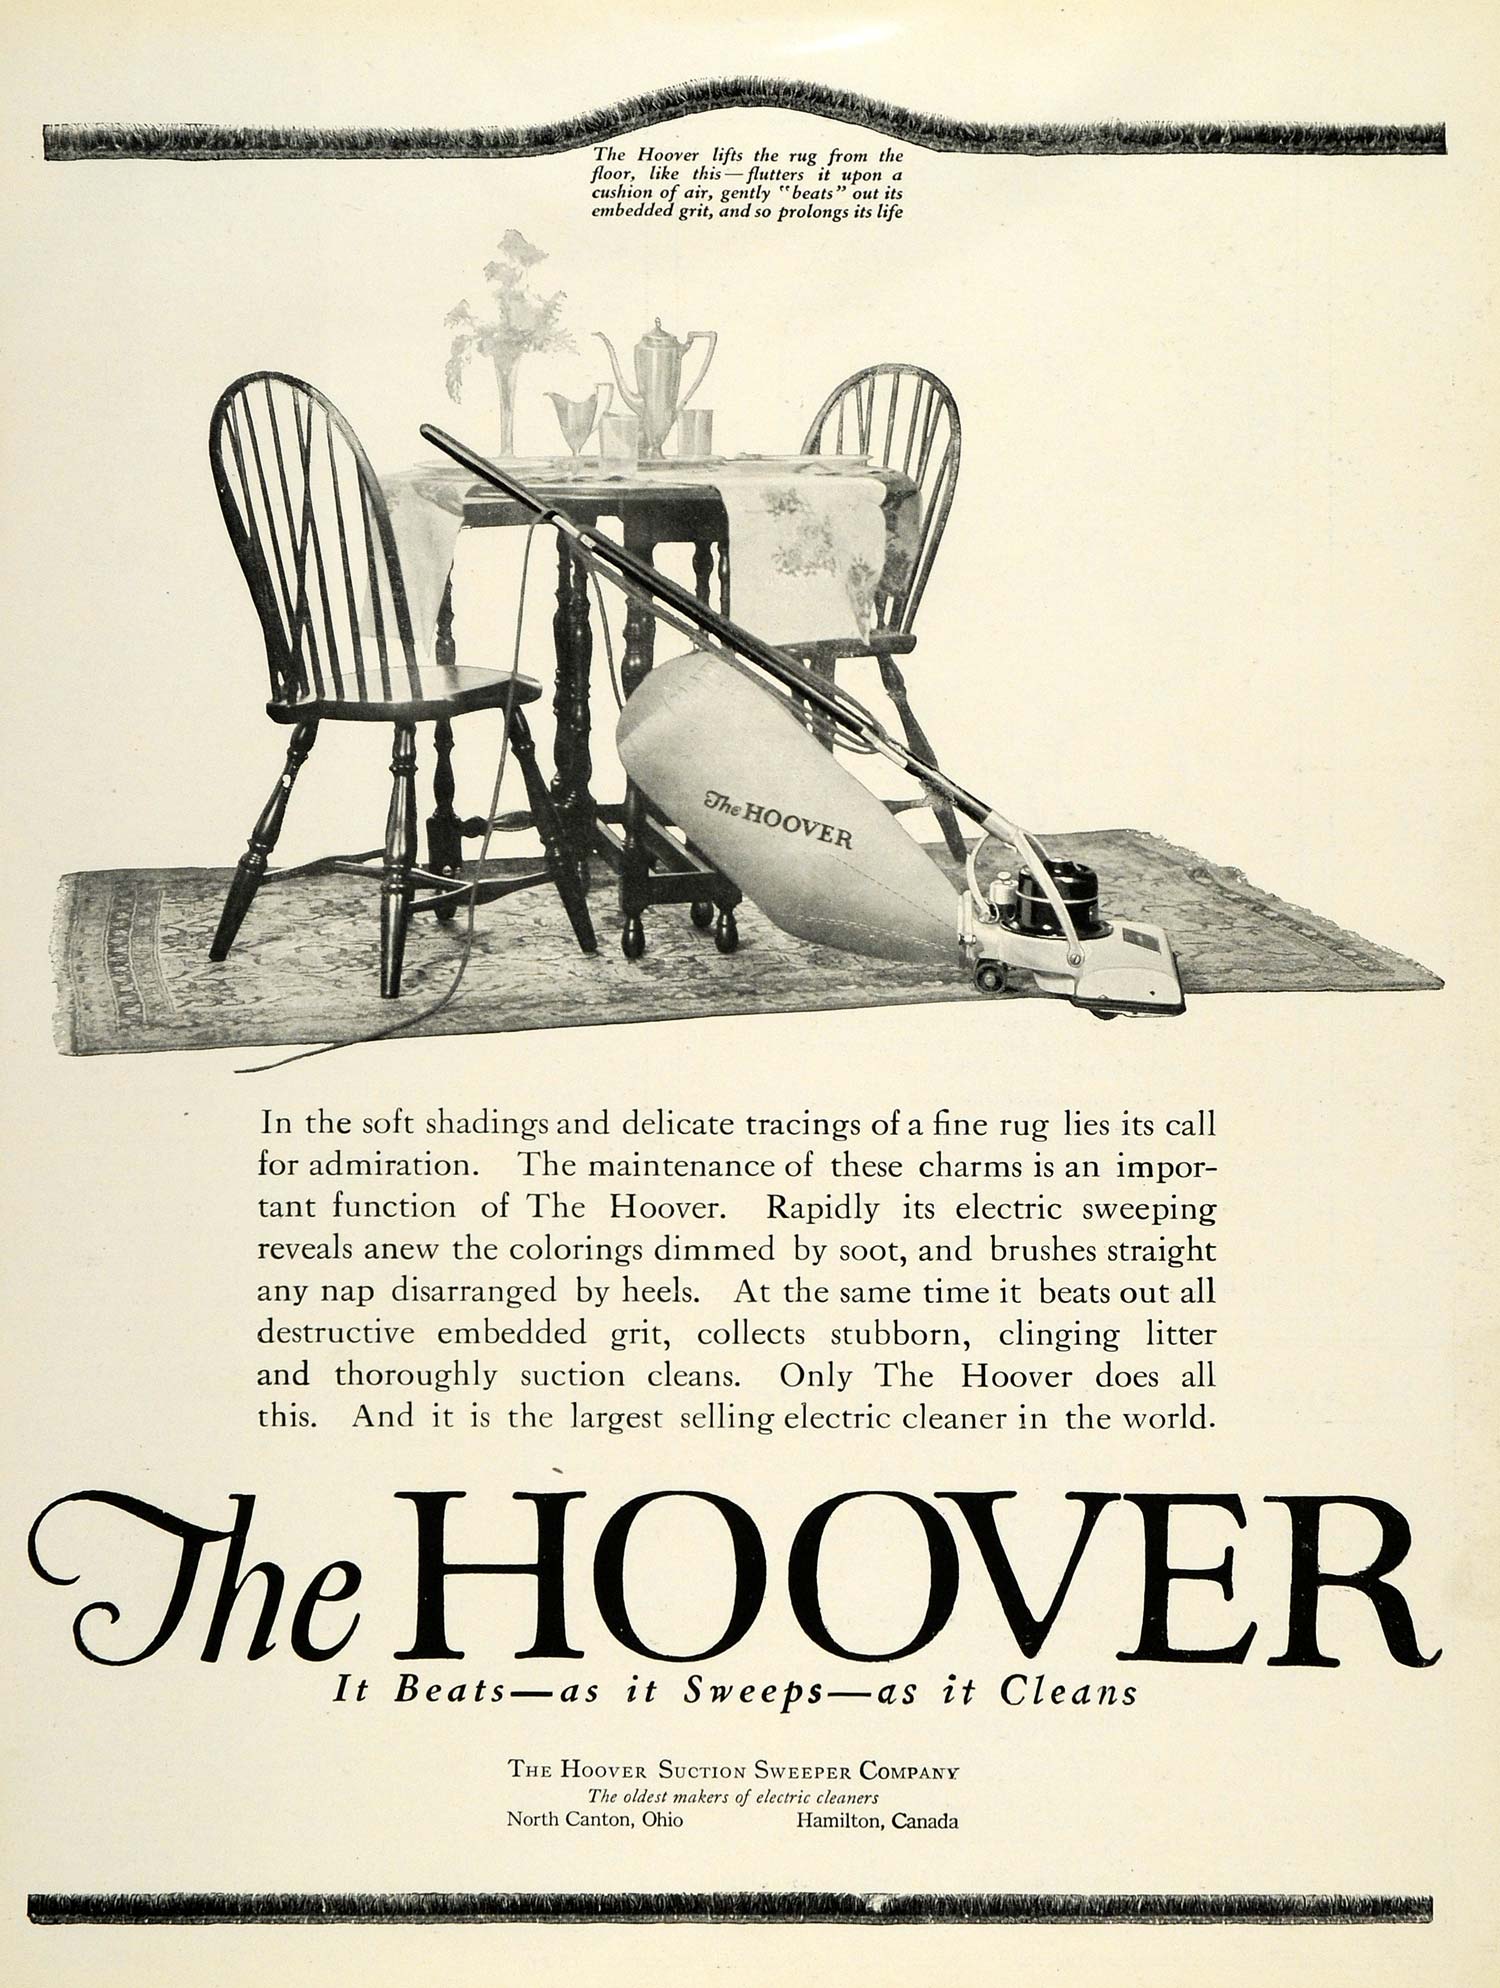 1920 Ad Hoover Suction Sweeper Co Vacuum Cleaner Appliances Carpet Rug Floor HB2